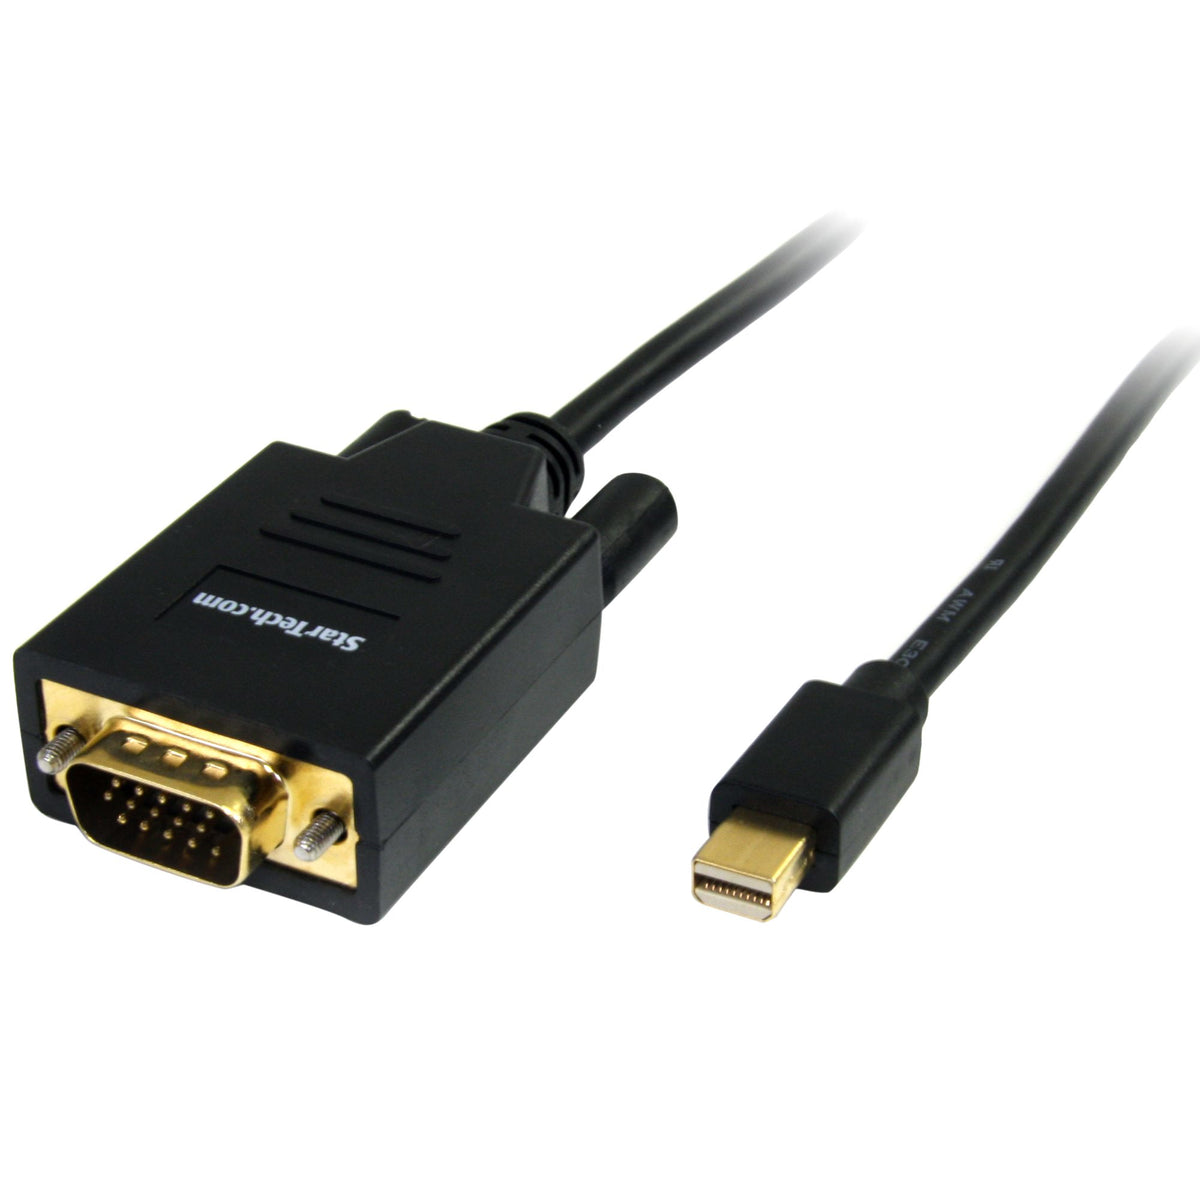 StarTech.com 6ft (2m) Mini DisplayPort to VGA Cable - Active Mini DP to VGA Adapter Cable - 1080p Video - mDP 1.2 or Thunderbolt 1/2 Mac/PC to VGA Monitor/Display - Converter Cord